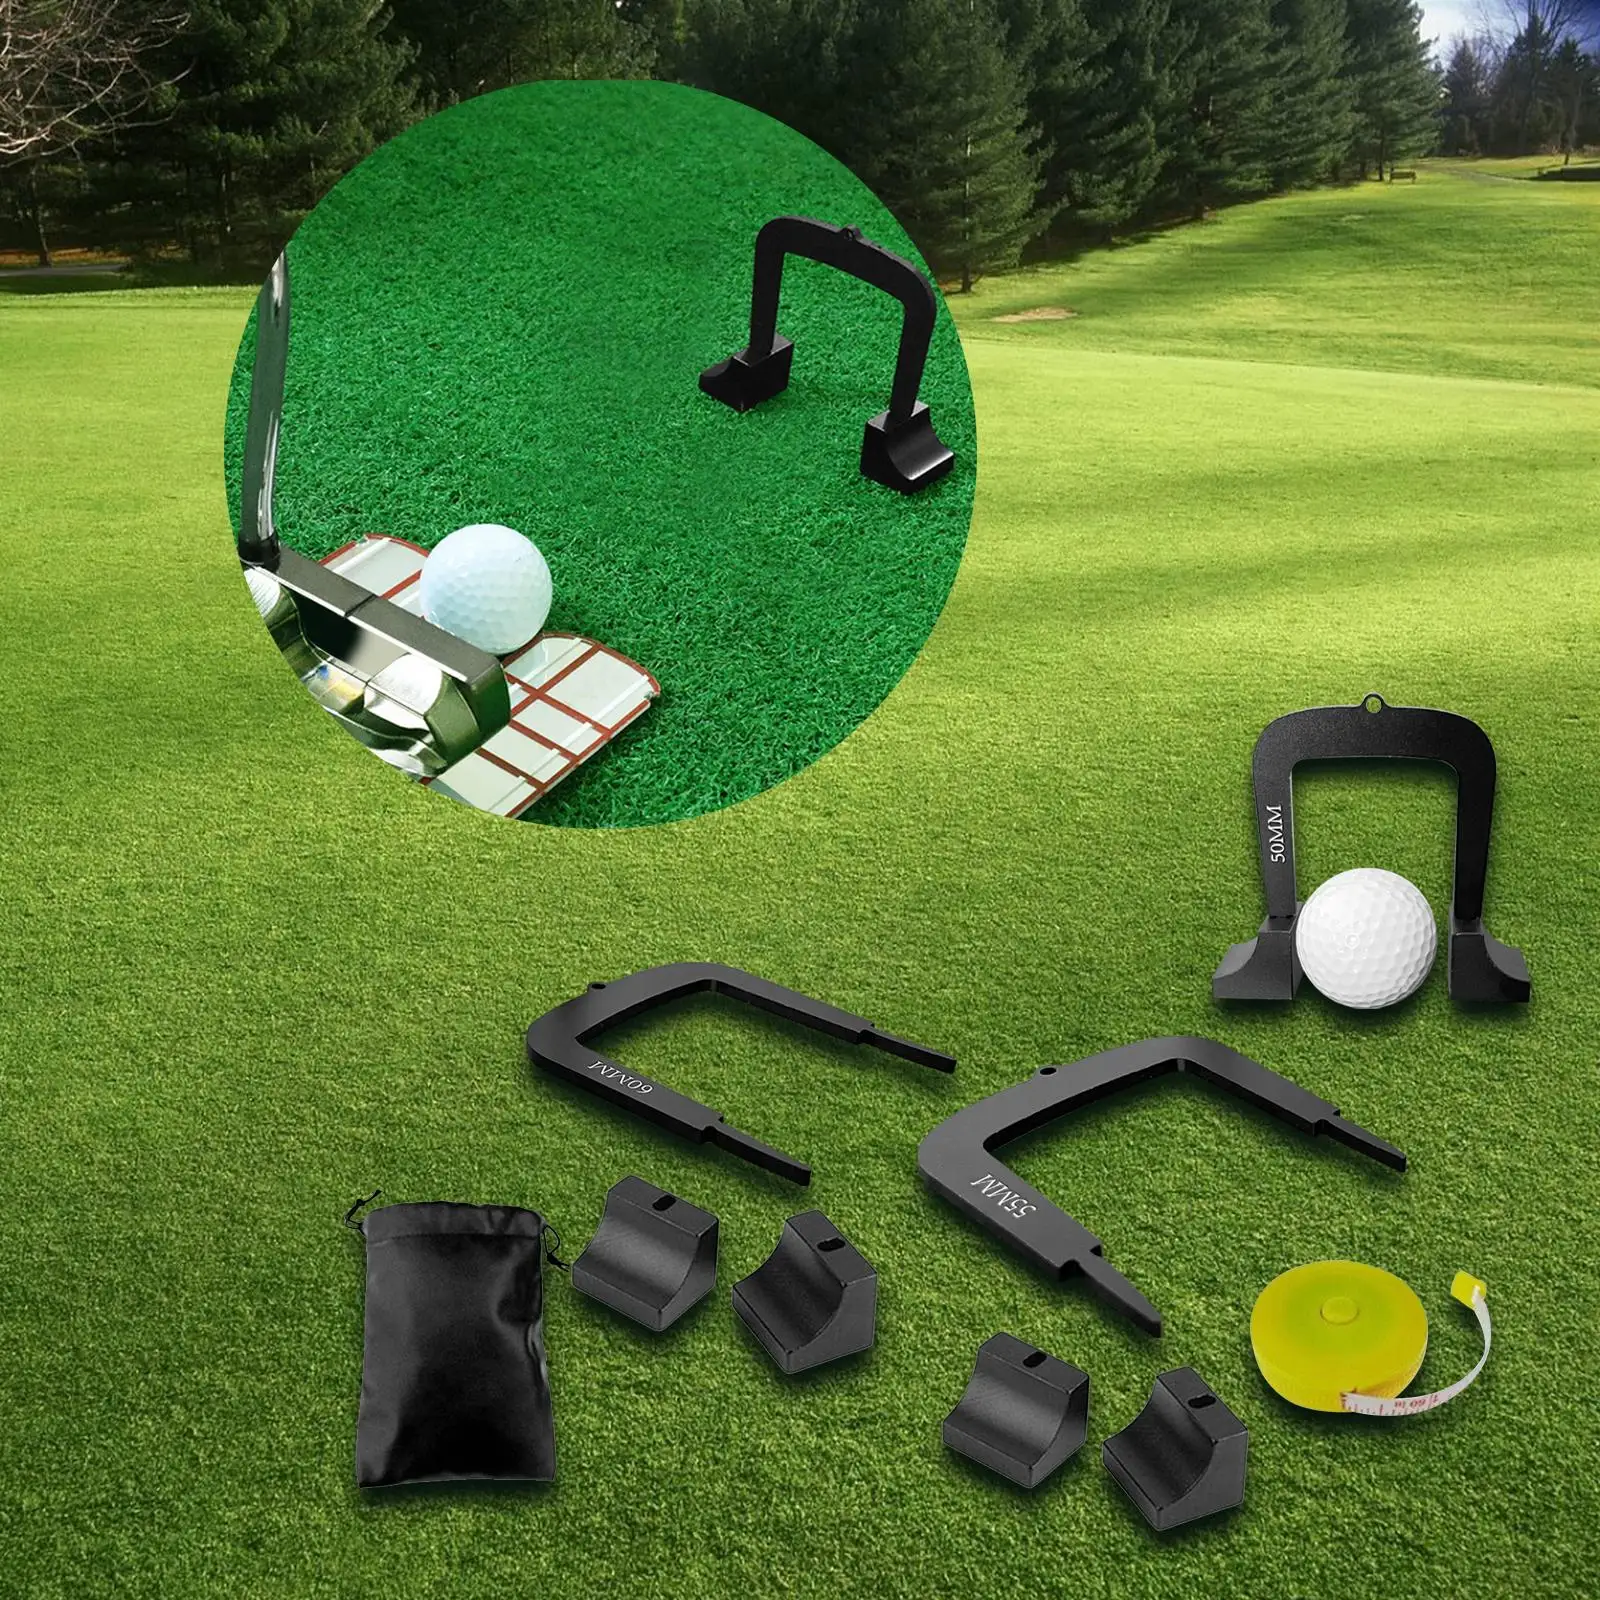 3x Golf Putting Gates Golf Training Equipment for Putt Alignment & Control Metal Putter Target for Indoor Outdoor with Bases